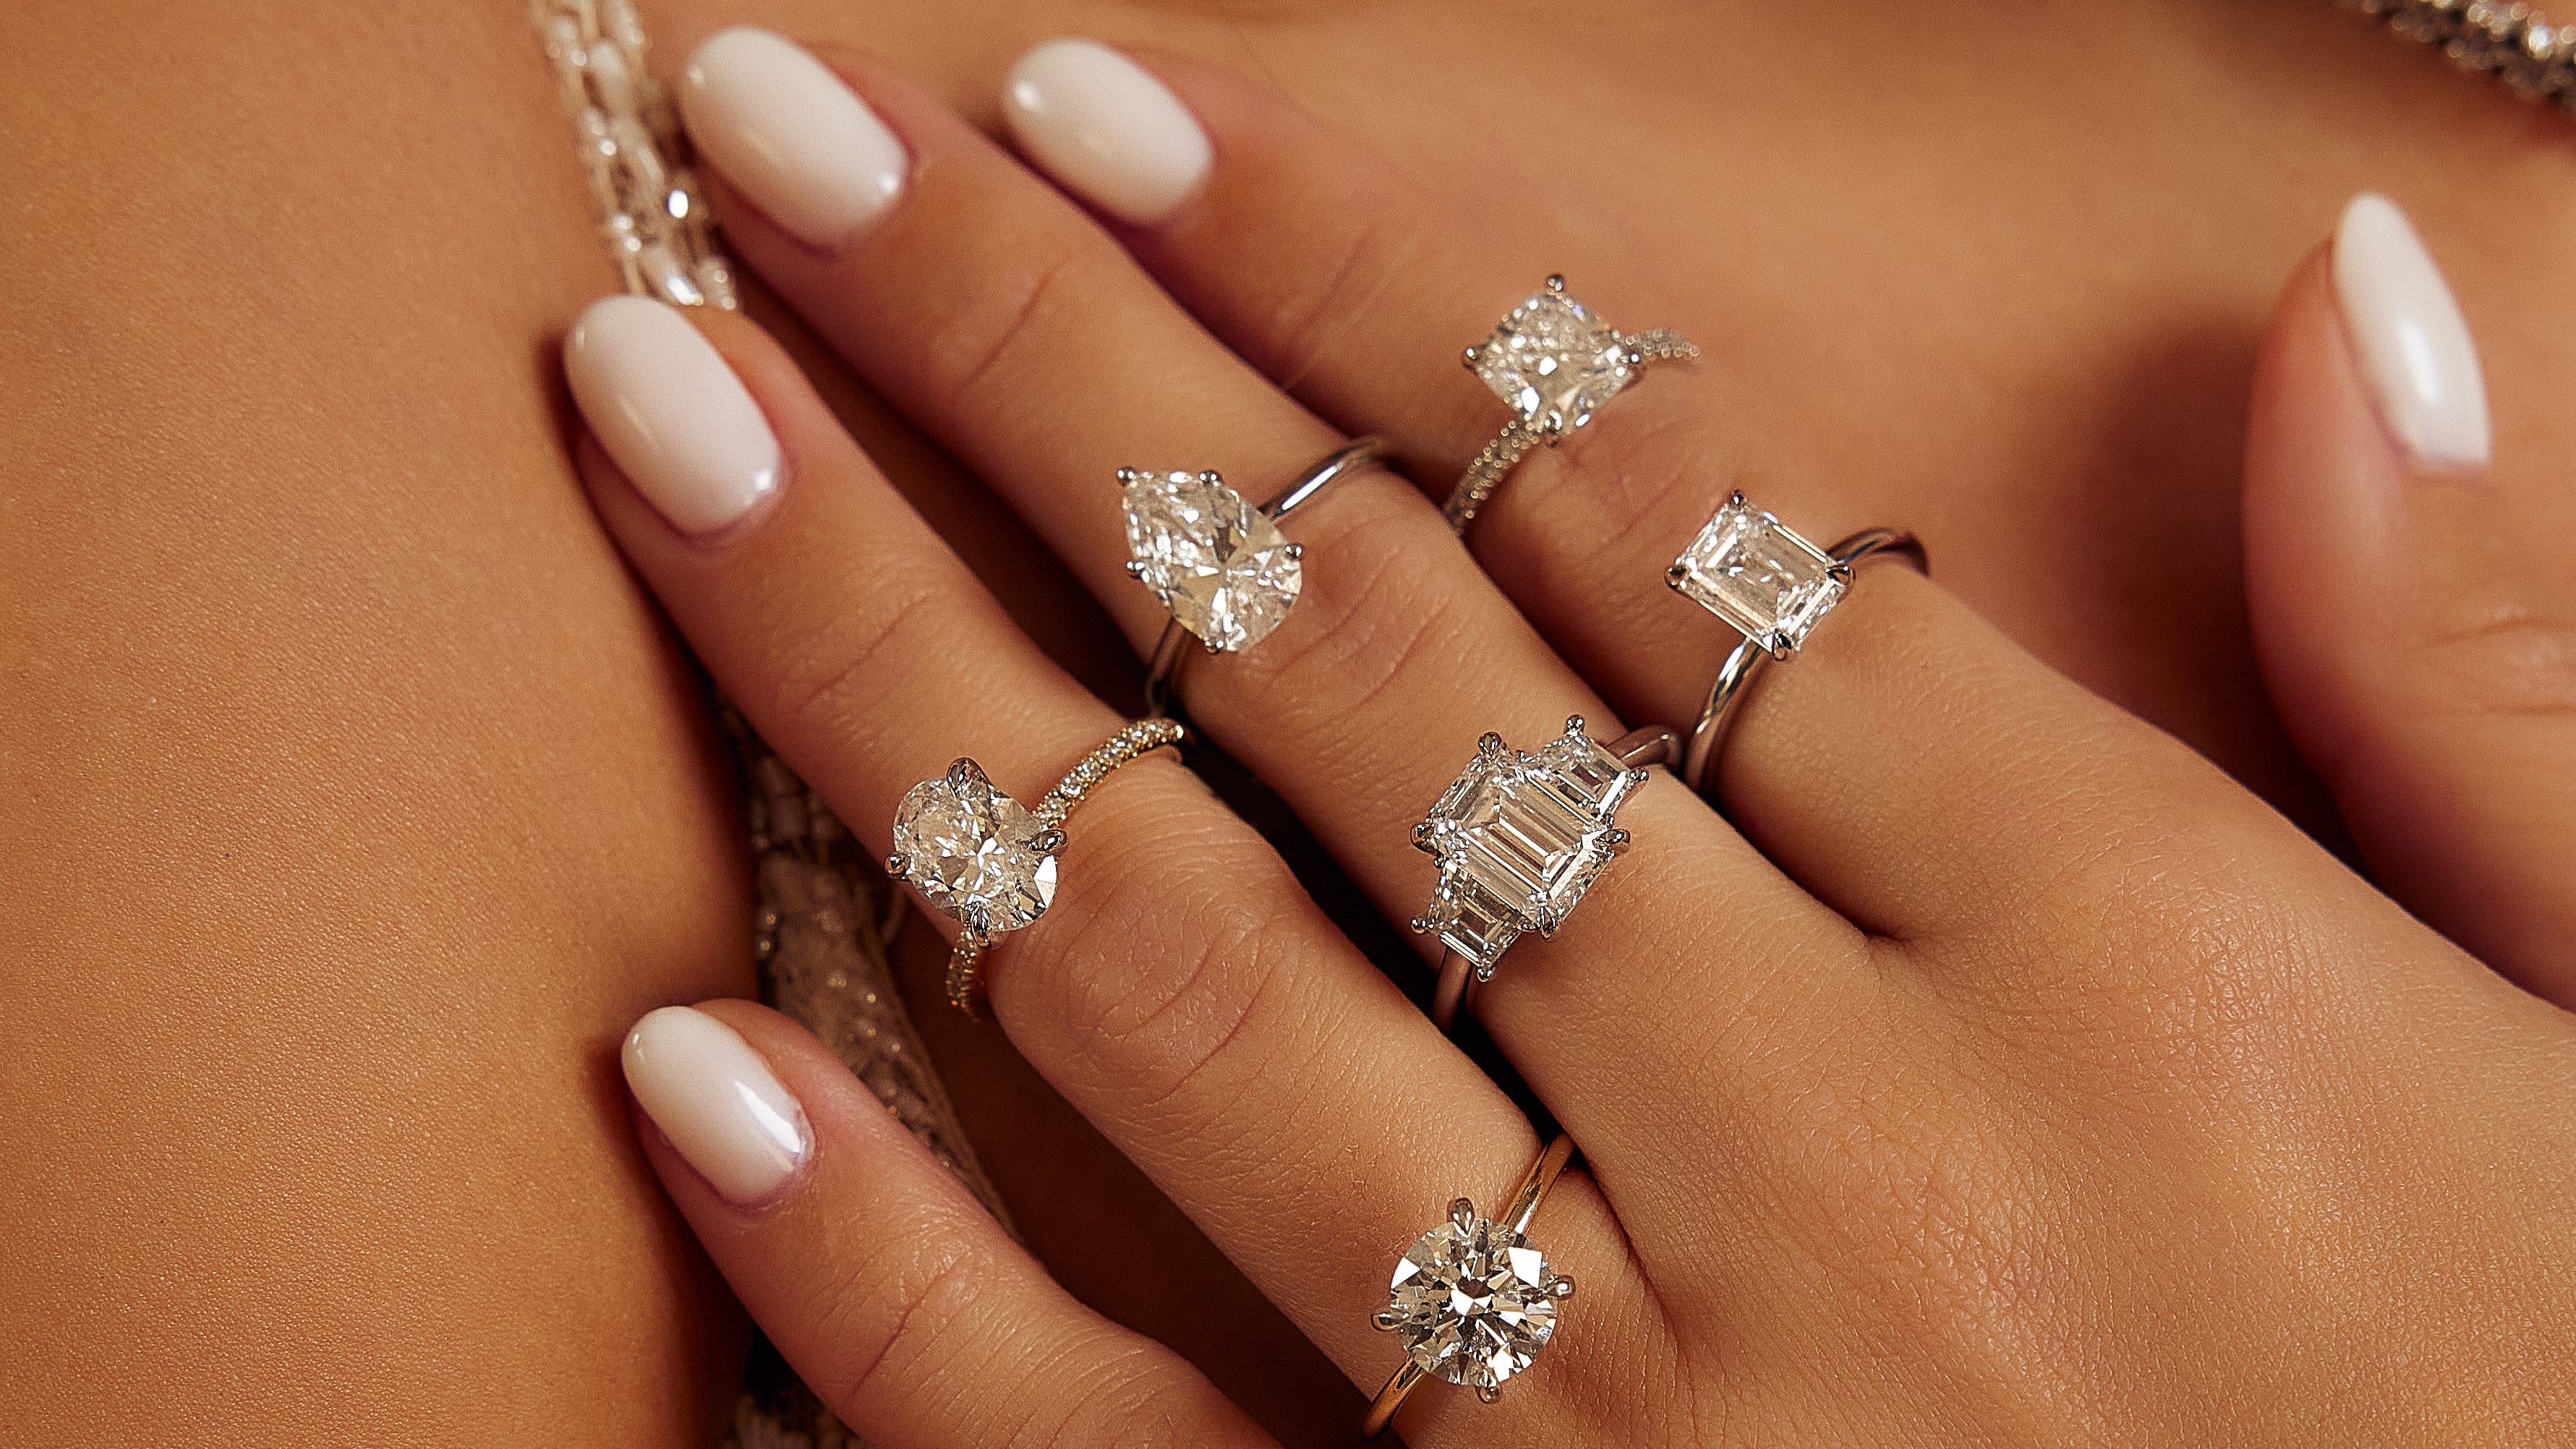 How to Pick the Engagement Ring of Your Dreams